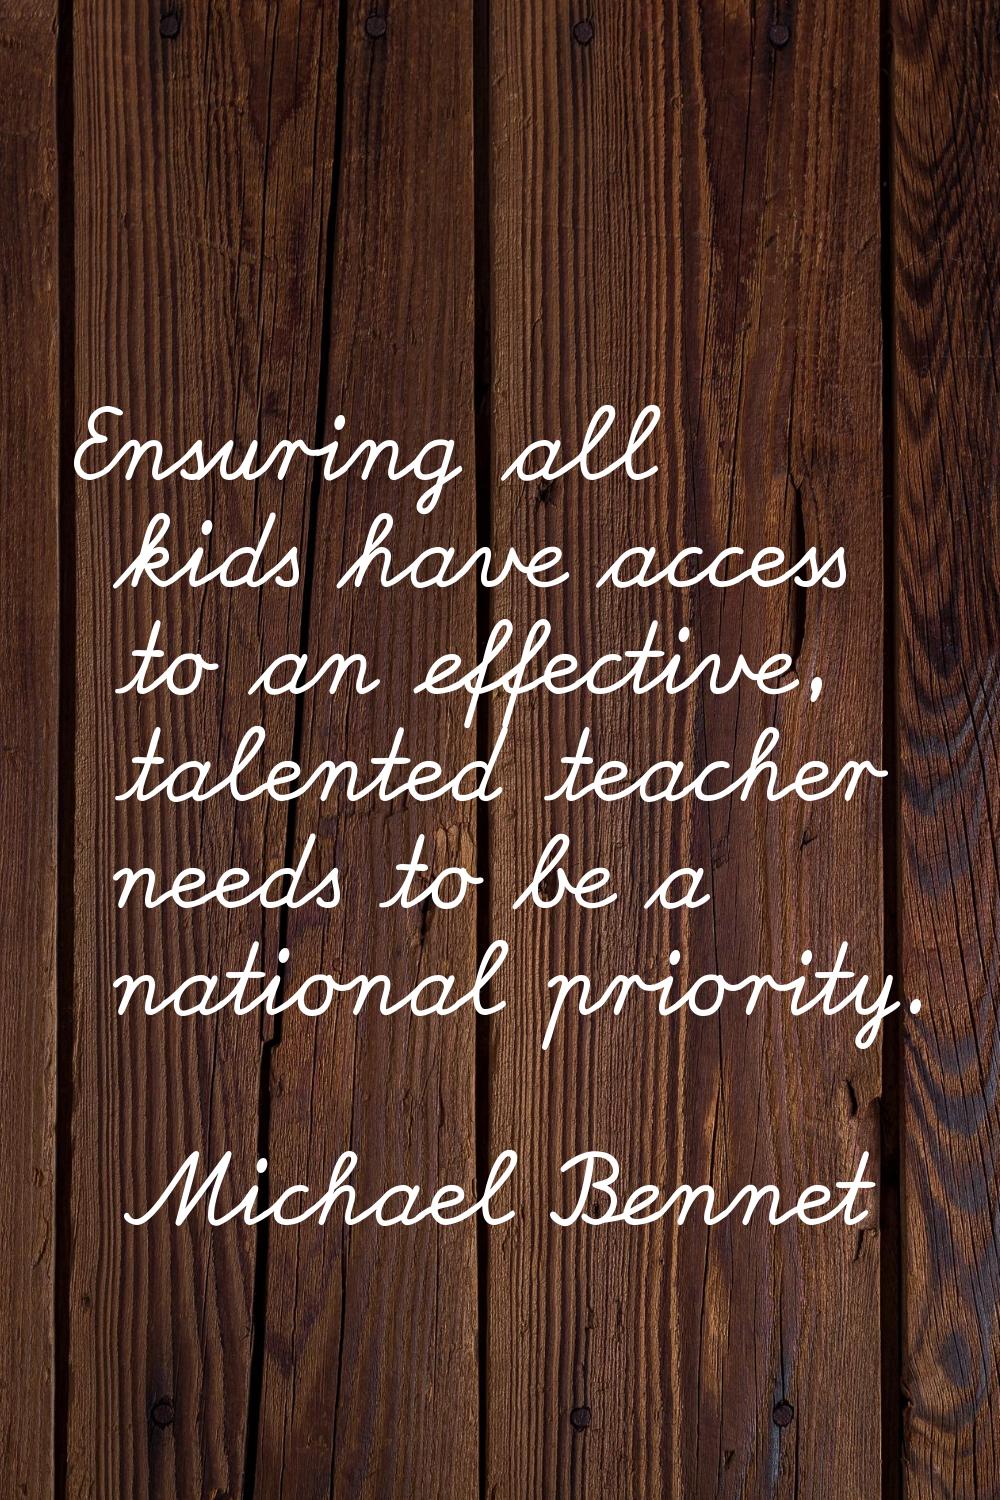 Ensuring all kids have access to an effective, talented teacher needs to be a national priority.